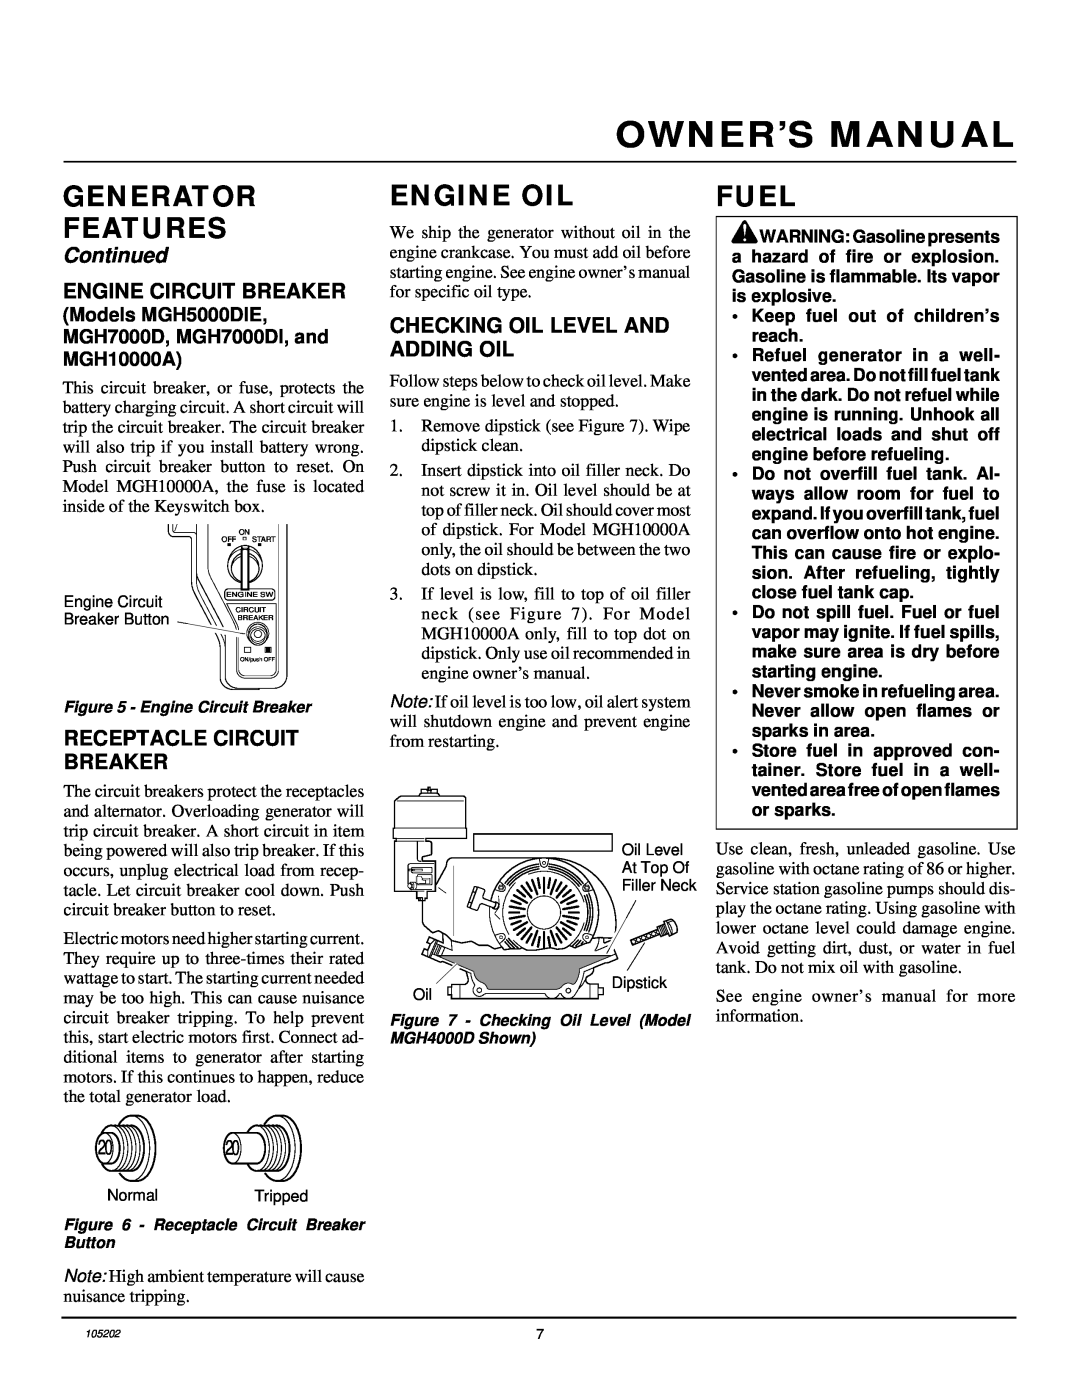 Master Lock Engine Oil, Fuel, Engine Circuit Breaker, Receptacle Circuit Breaker, Checking Oil Level And Adding Oil 